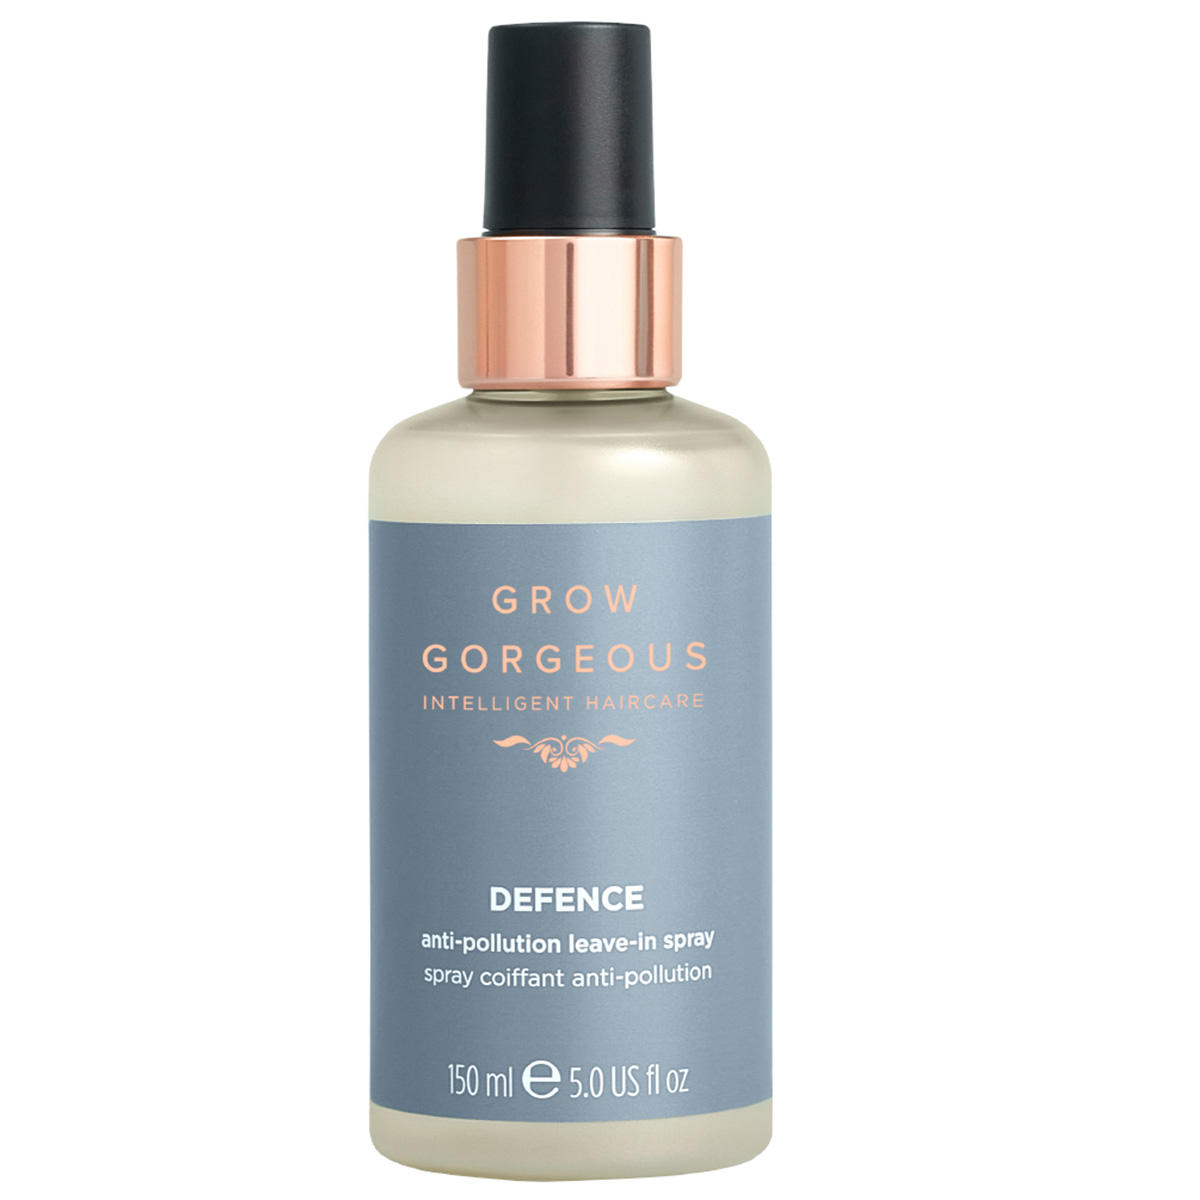 GROW GORGEOUS Defence Anti-Pollution Leave-In Spray 150 ml - 1